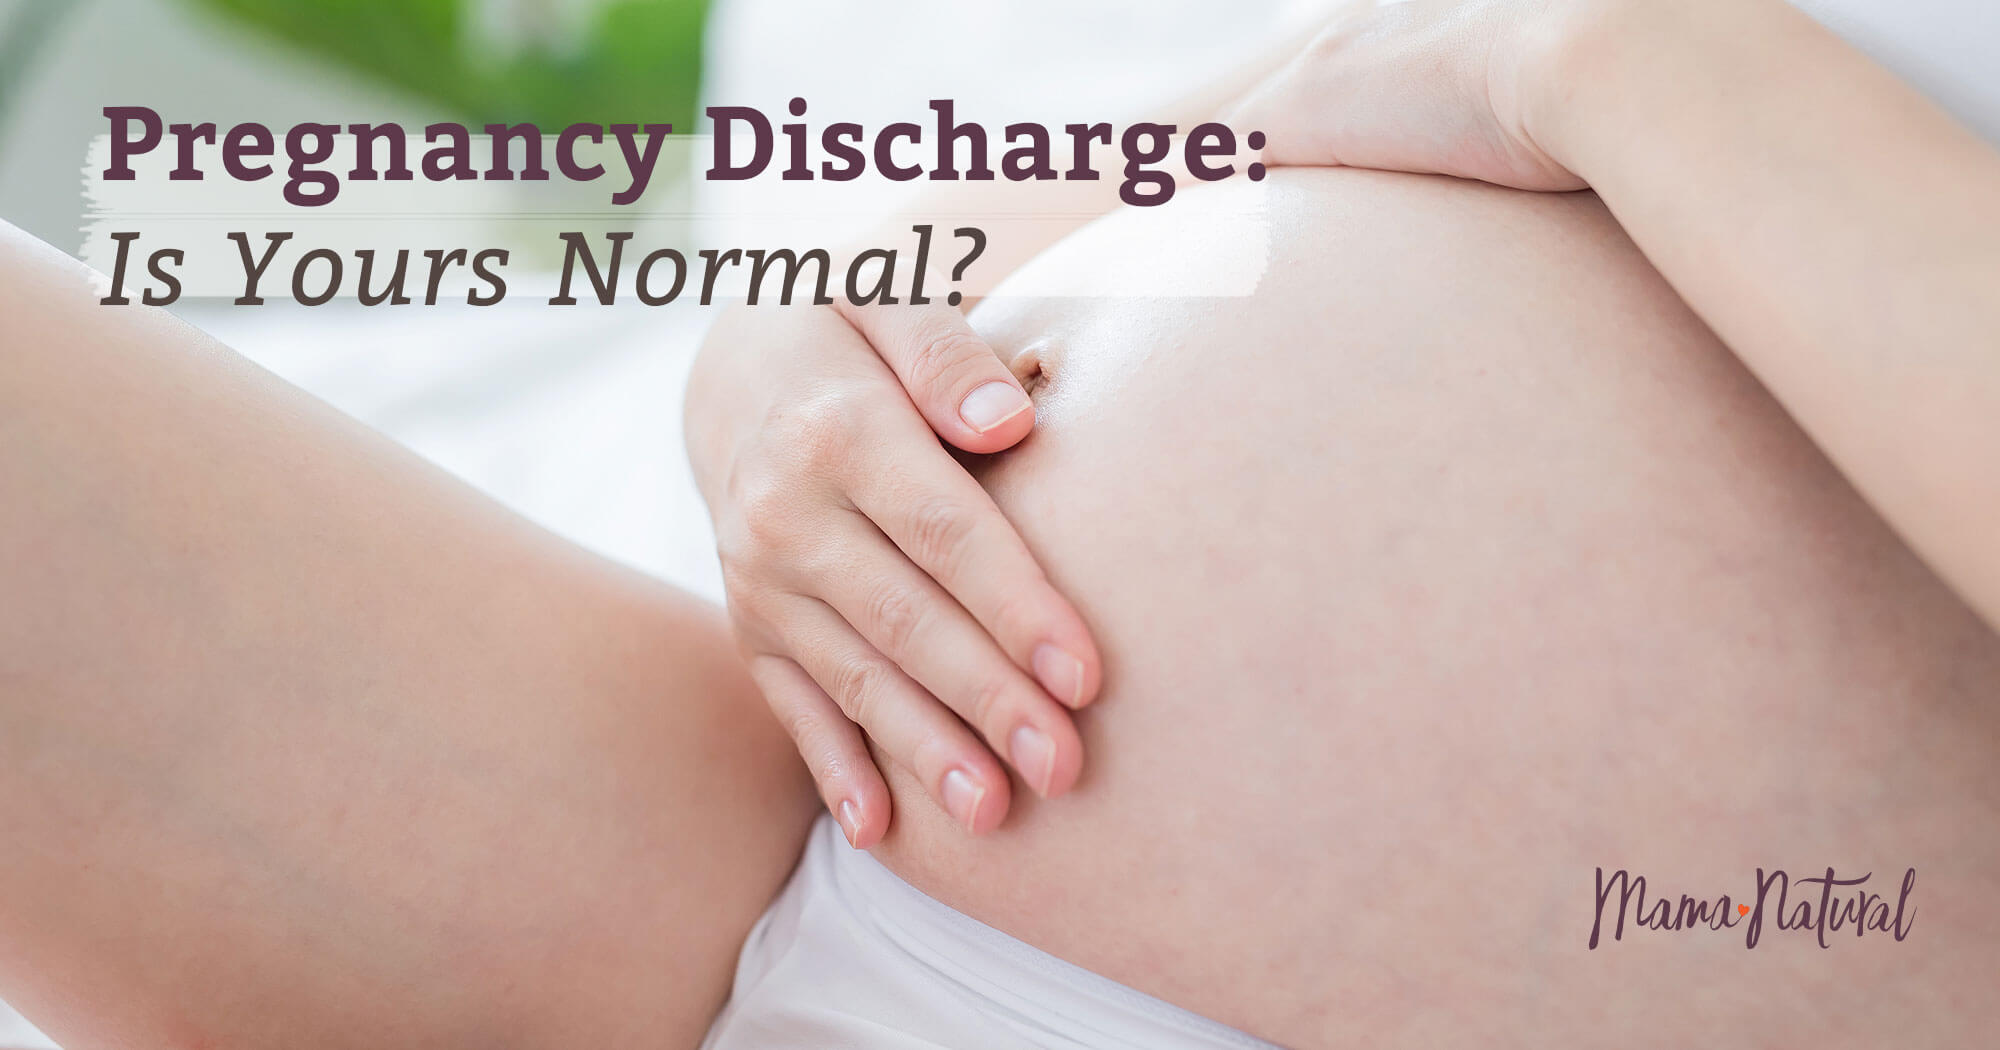 Yellow Discharge During Pregnancy: Causes, Treatment, and Risks